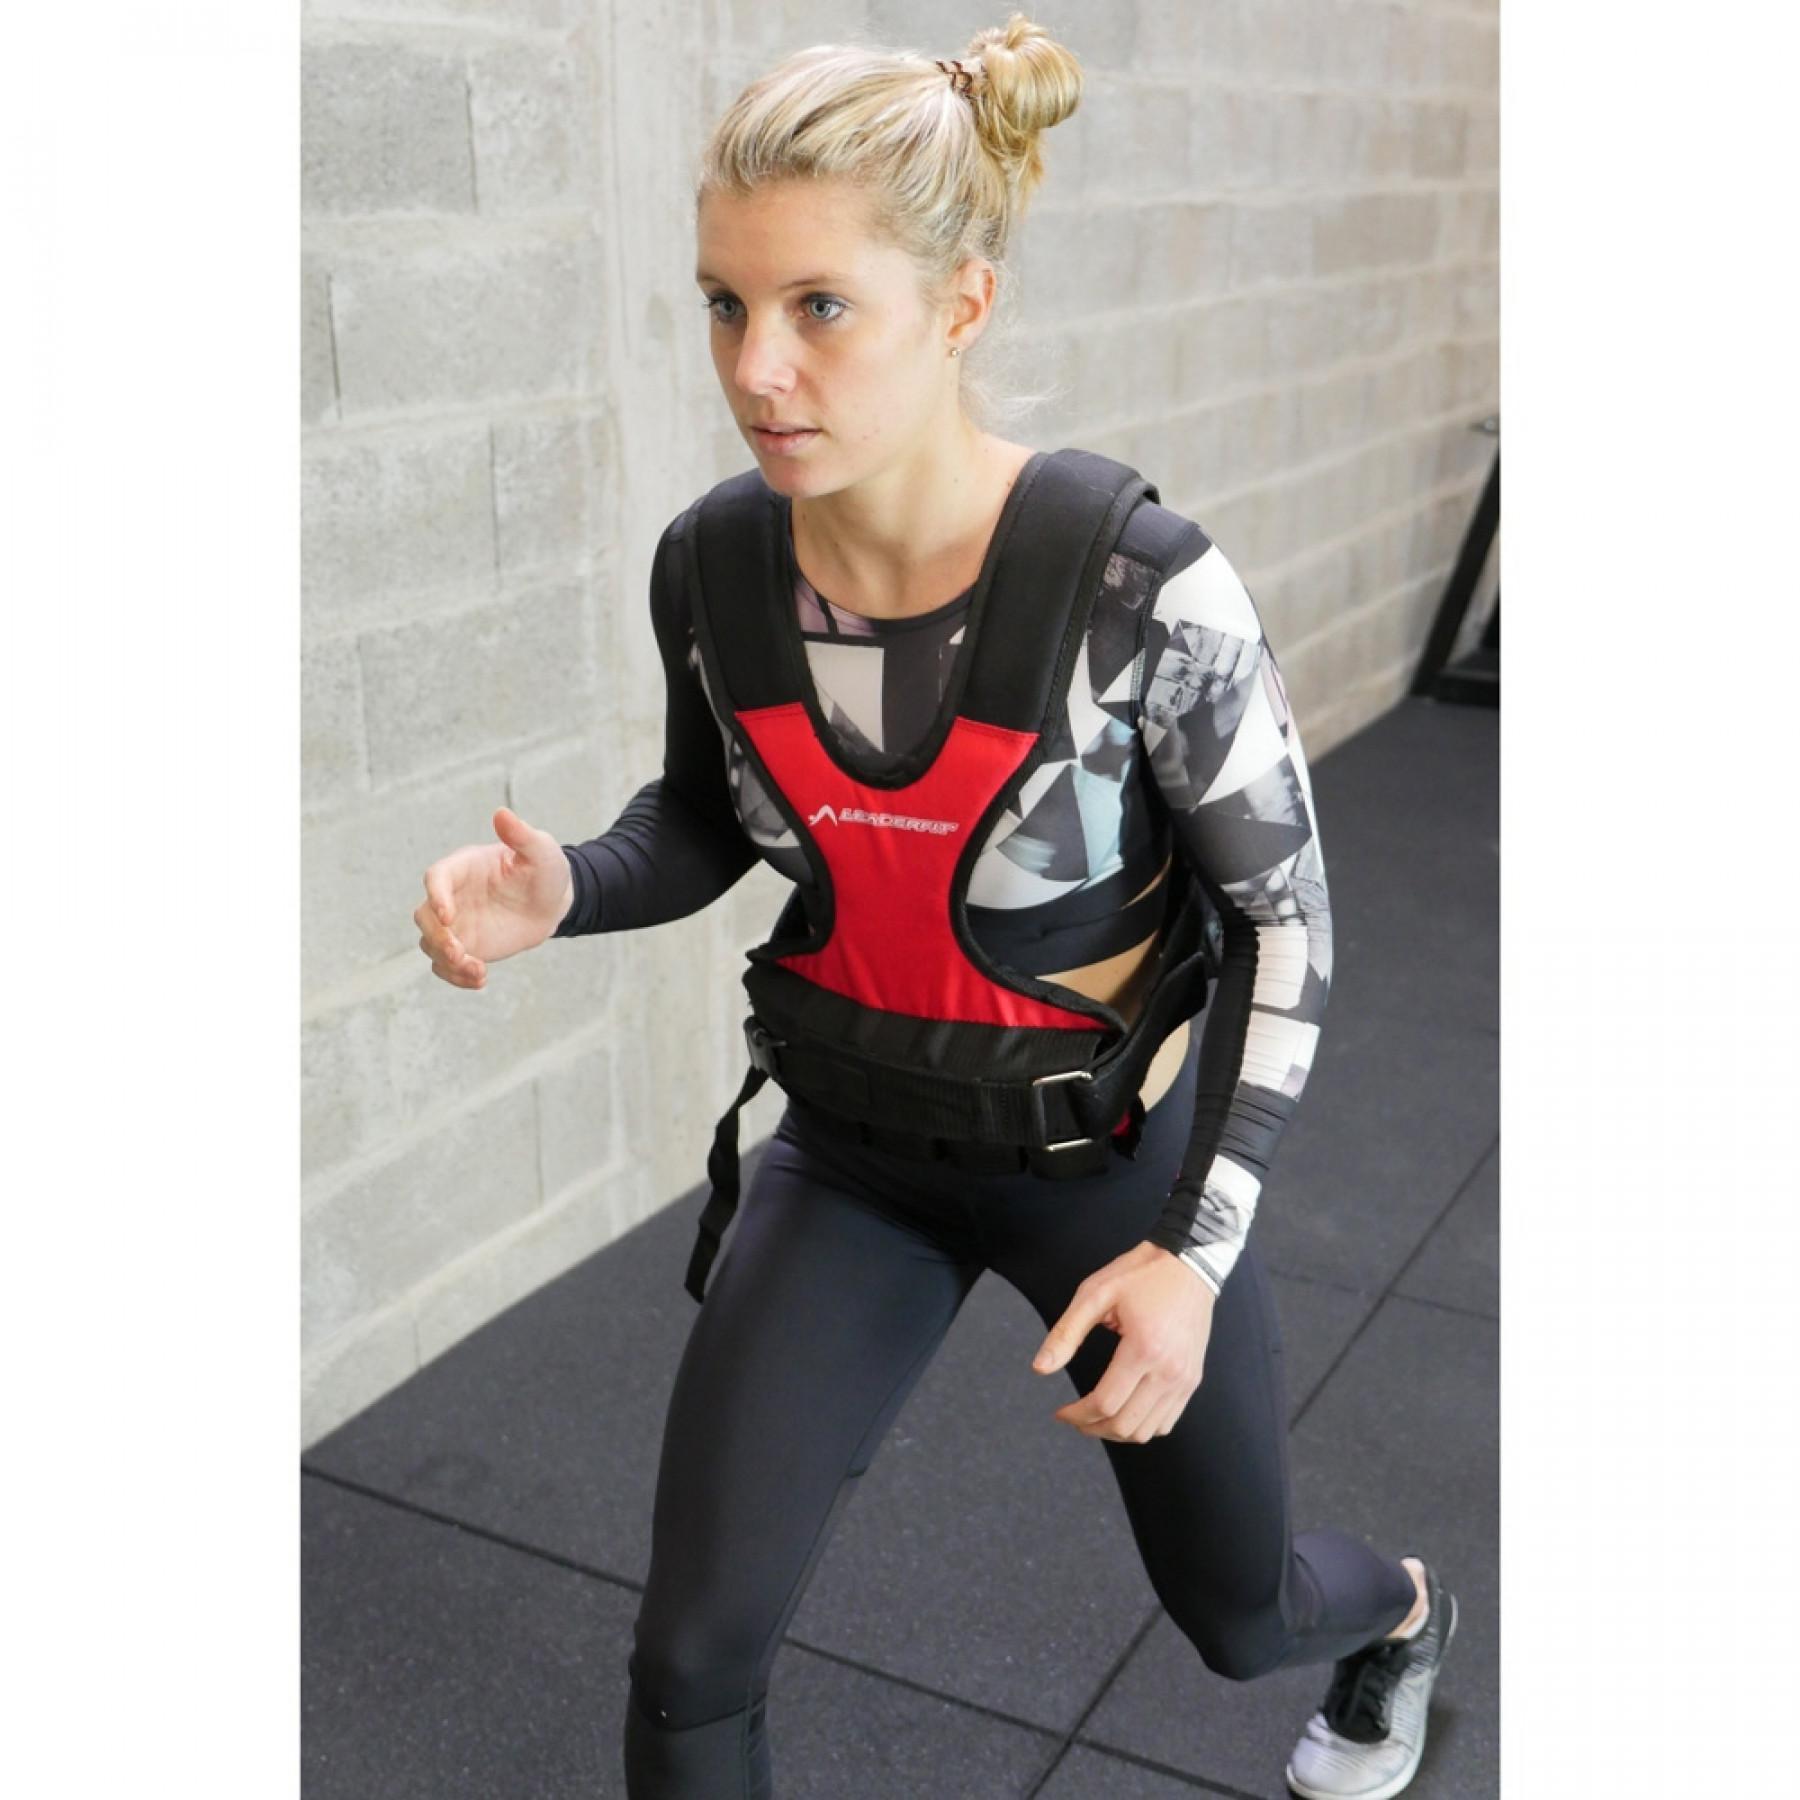 Weighted vest for women Leader Fit 10kg